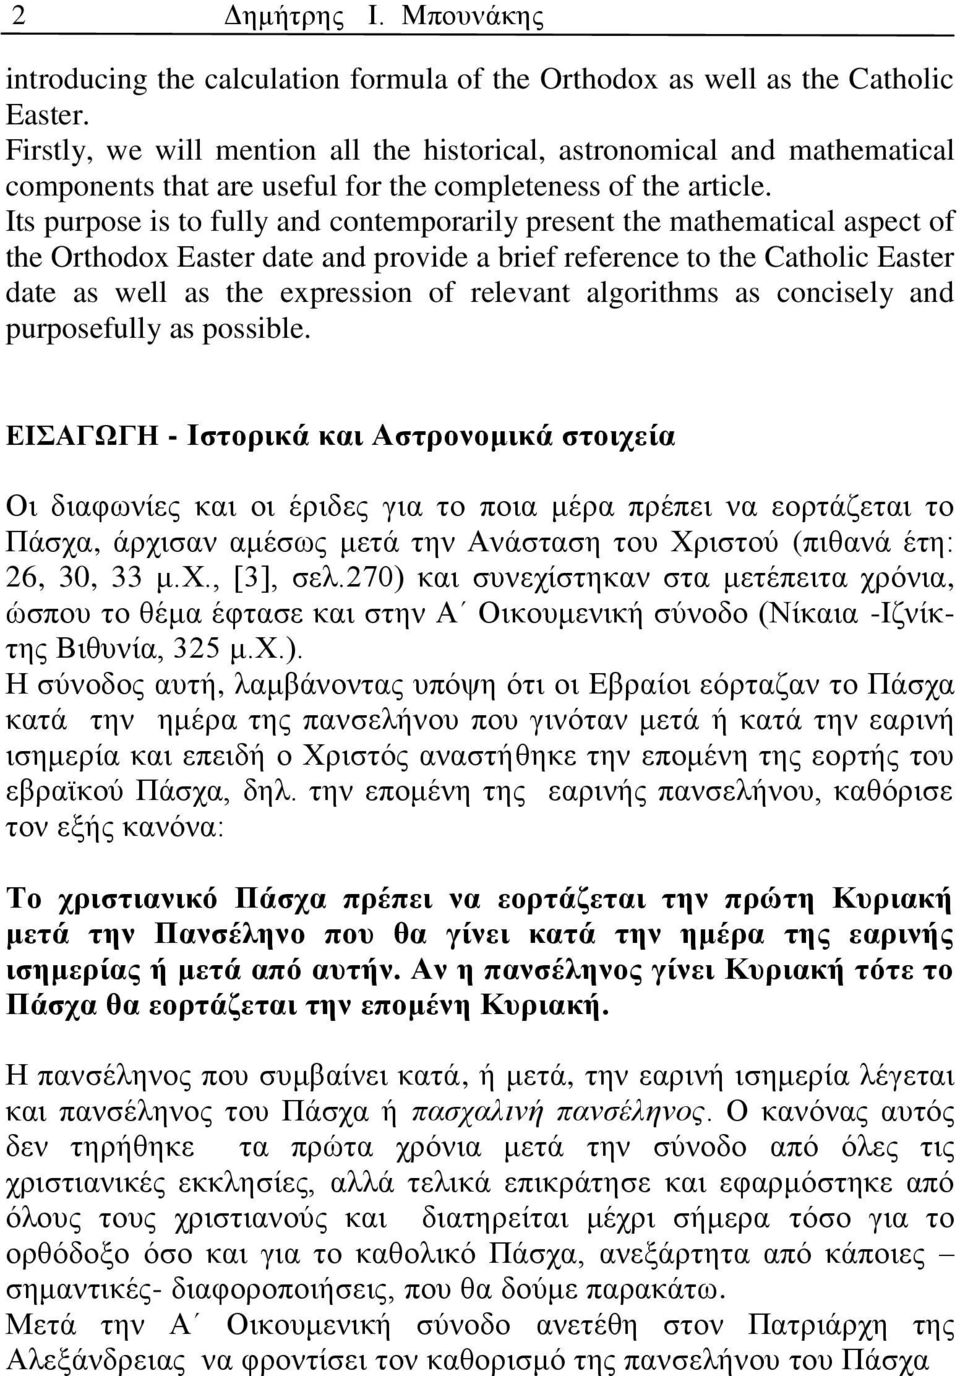 Its purpose is to fully and contemporarily present the mathematical aspect of the Orthodox Easter date and provide a brief reference to the Catholic Easter date as well as the expression of relevant